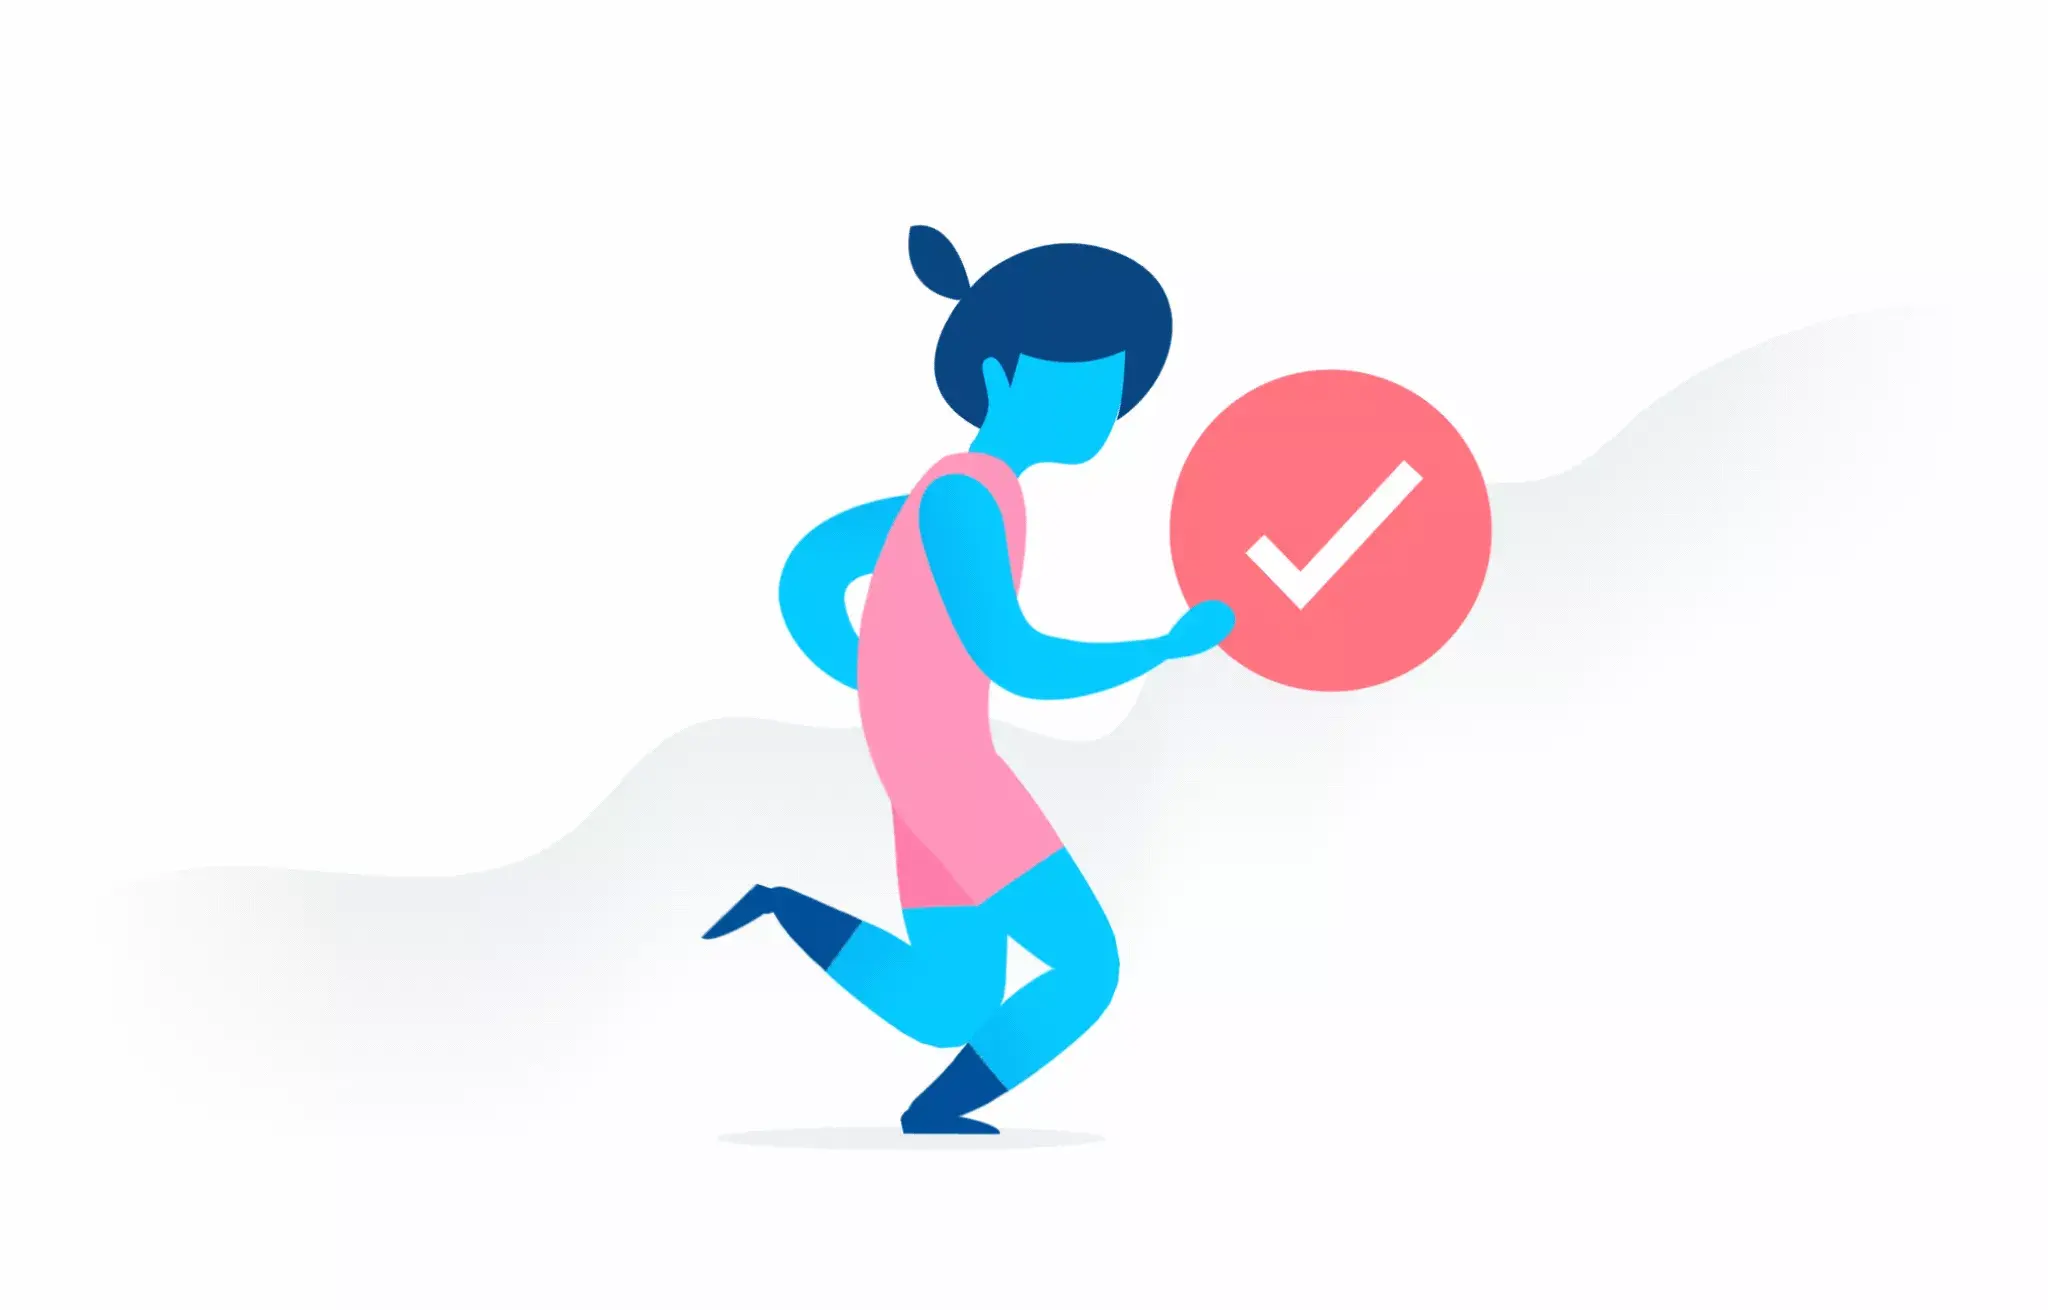 An update on performance: Asana is now 2x faster